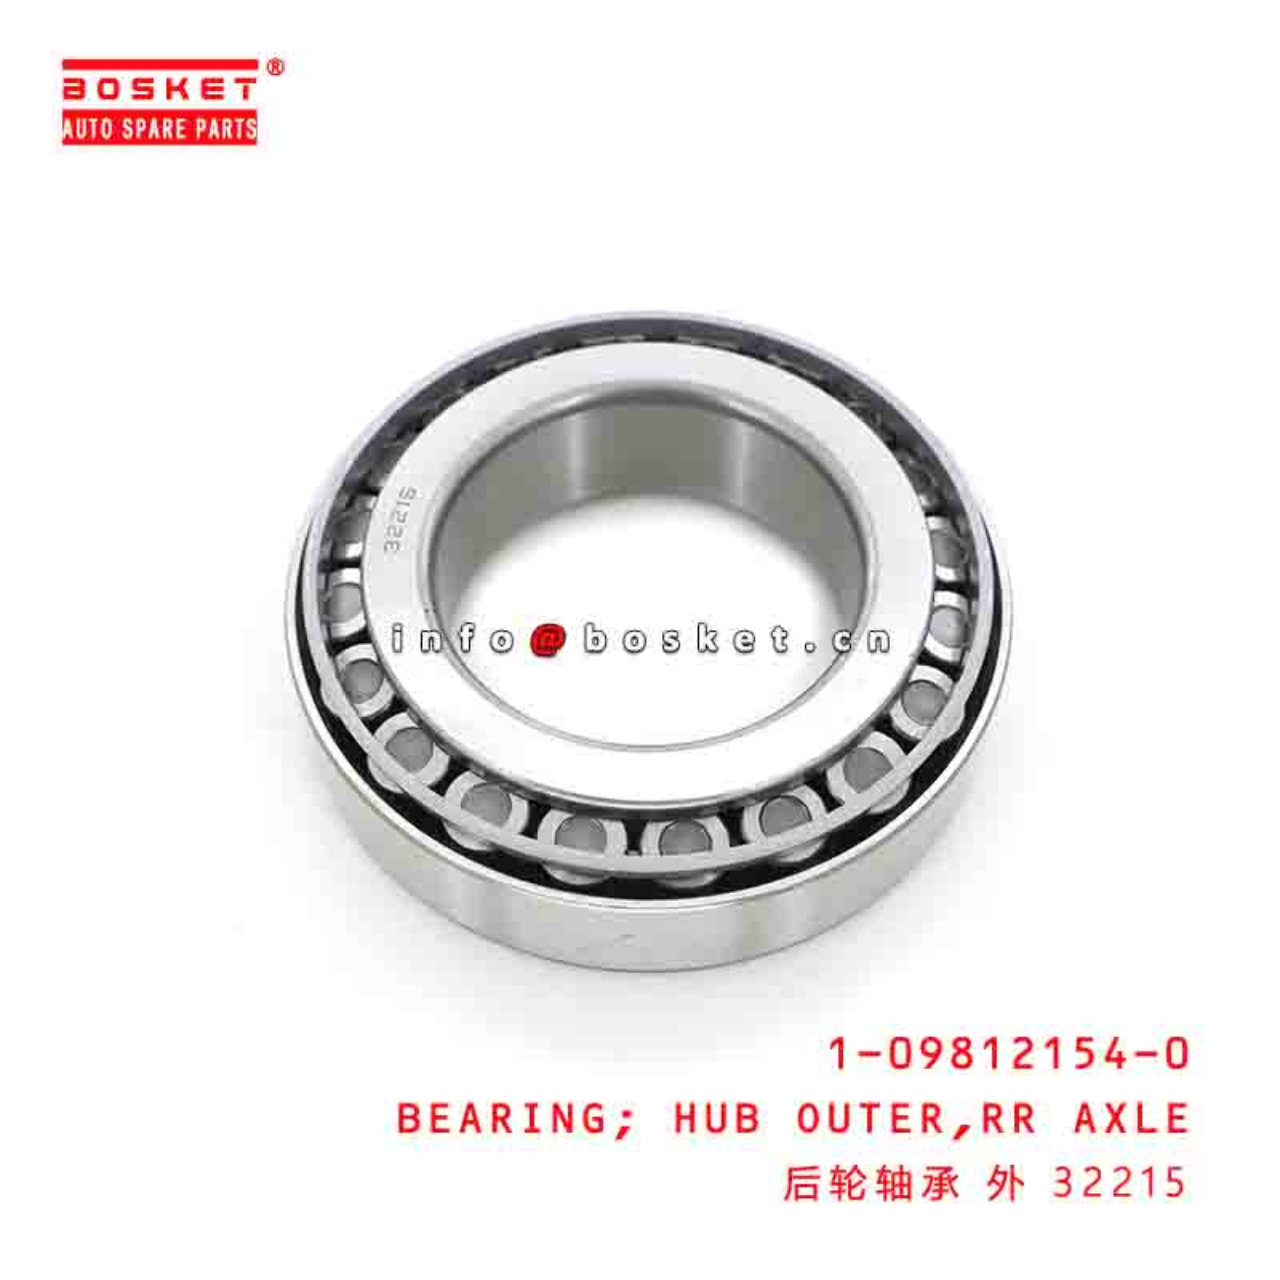  1-09812154-0 1098121540 REAR AXLE HUB OUTER BEARING Suitable for ISUZU FTR33 6HH1